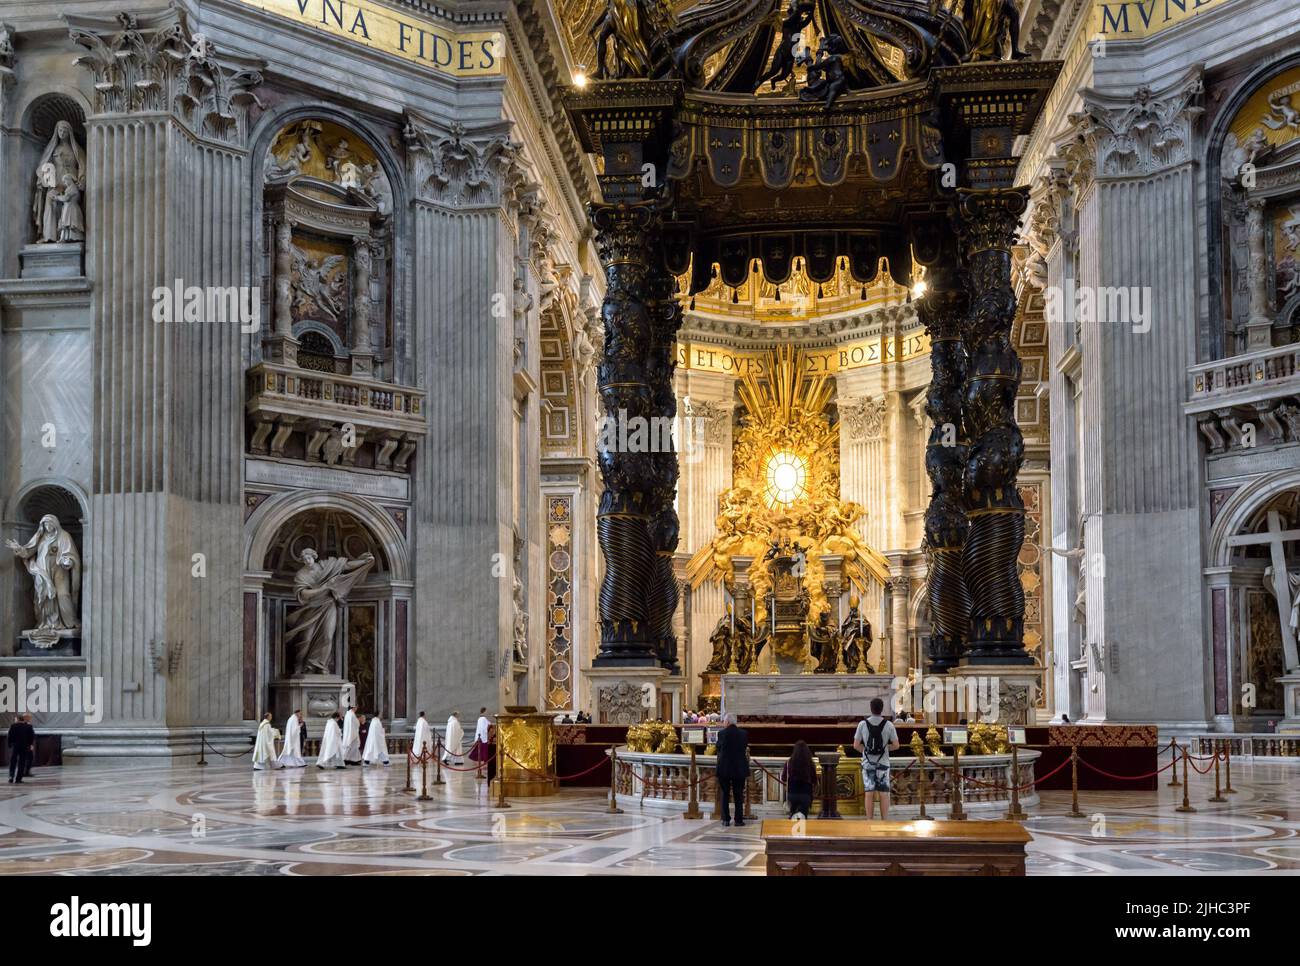 Rome - Jun 12, 2021: Inside St Peter Basilica, Rome, Italy. Ornate Saint Peters cathedral is top landmark of Rome and Vatican City. Luxury baldacchino Stock Photo